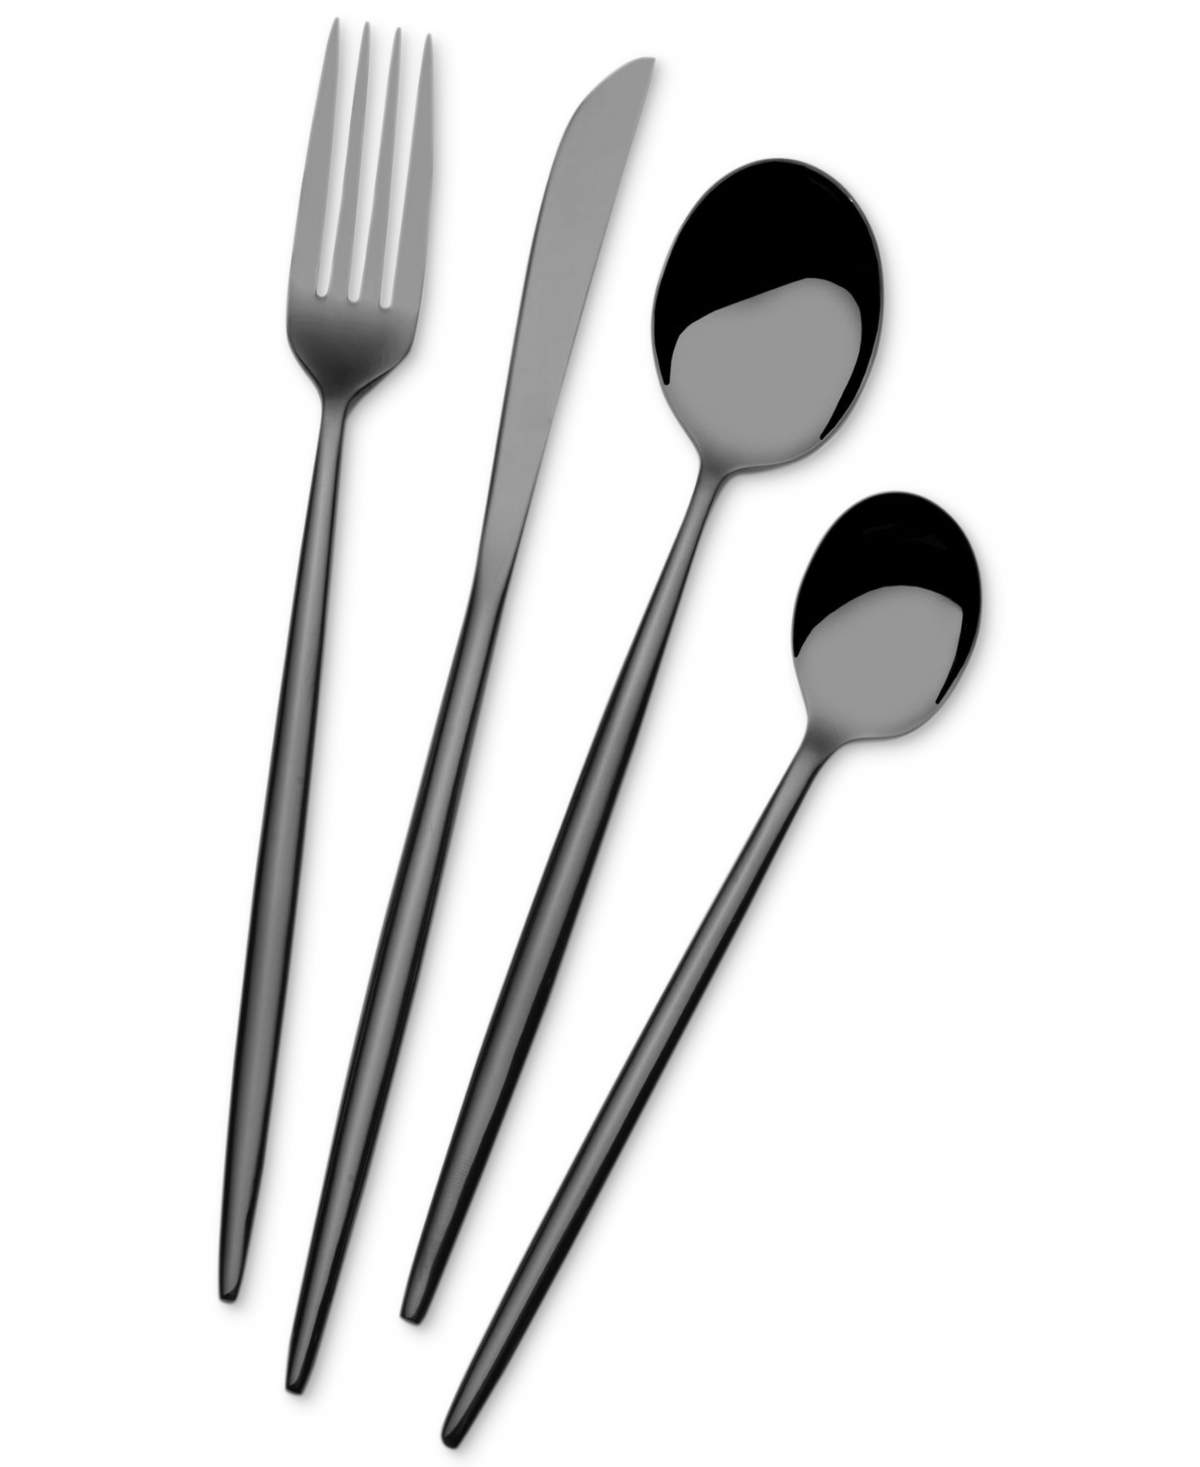 Towle Living Forged Shea 16-pc. Flatware Set, Service For 4 In Black ...